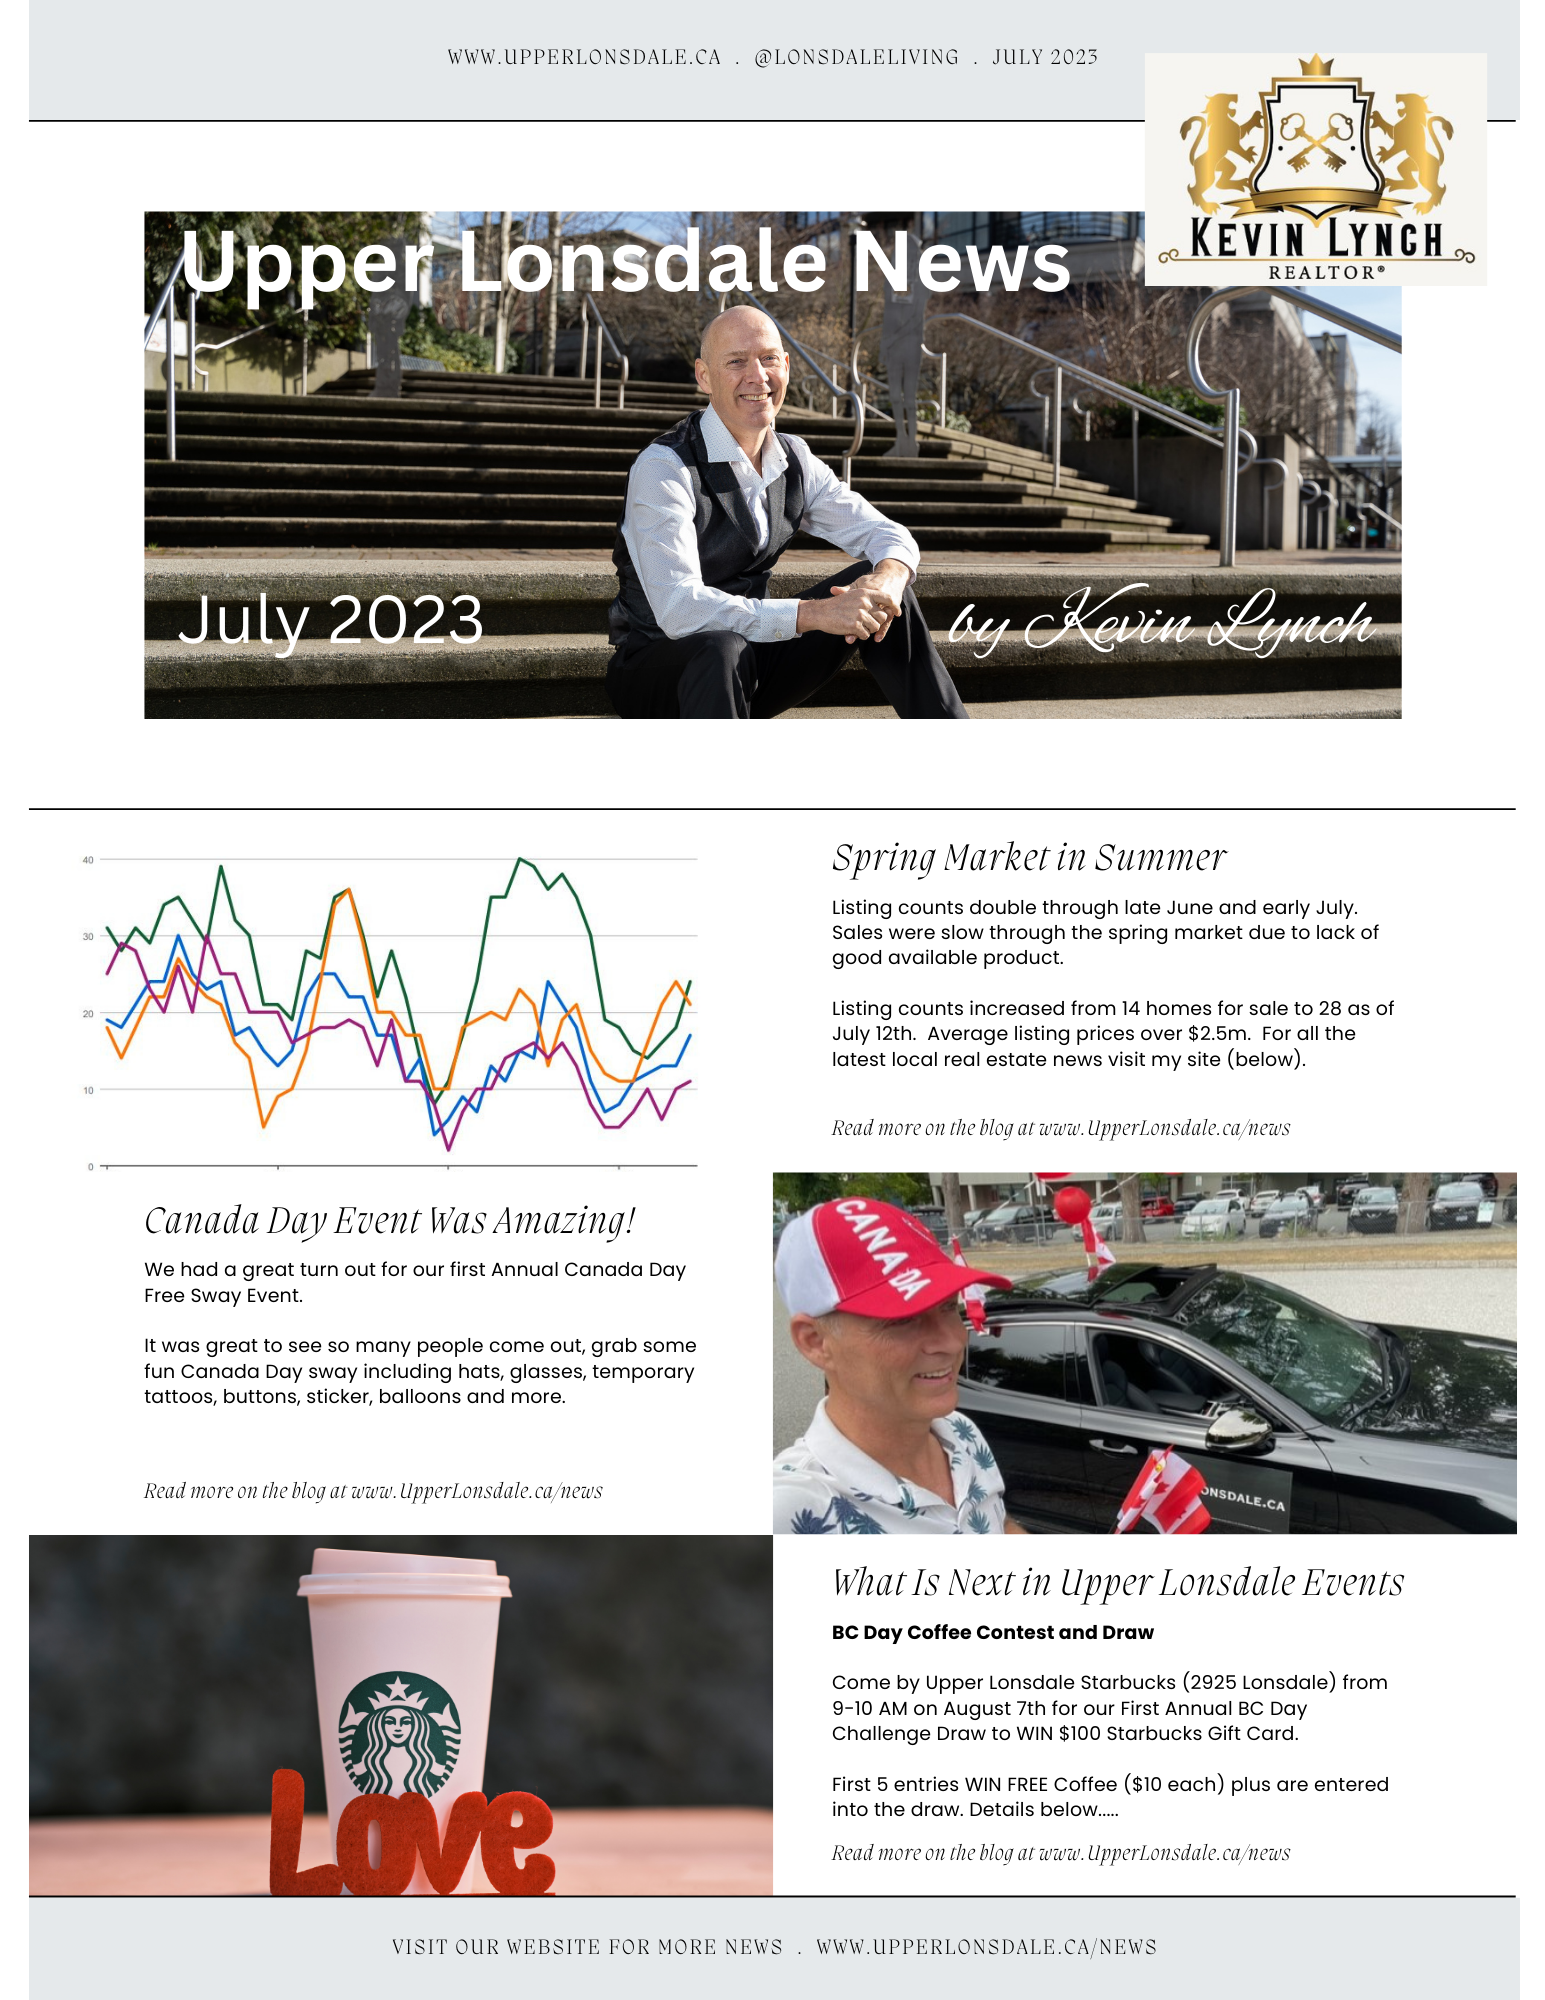 Upper Lonsdale news by Upper Lonsdale Expert